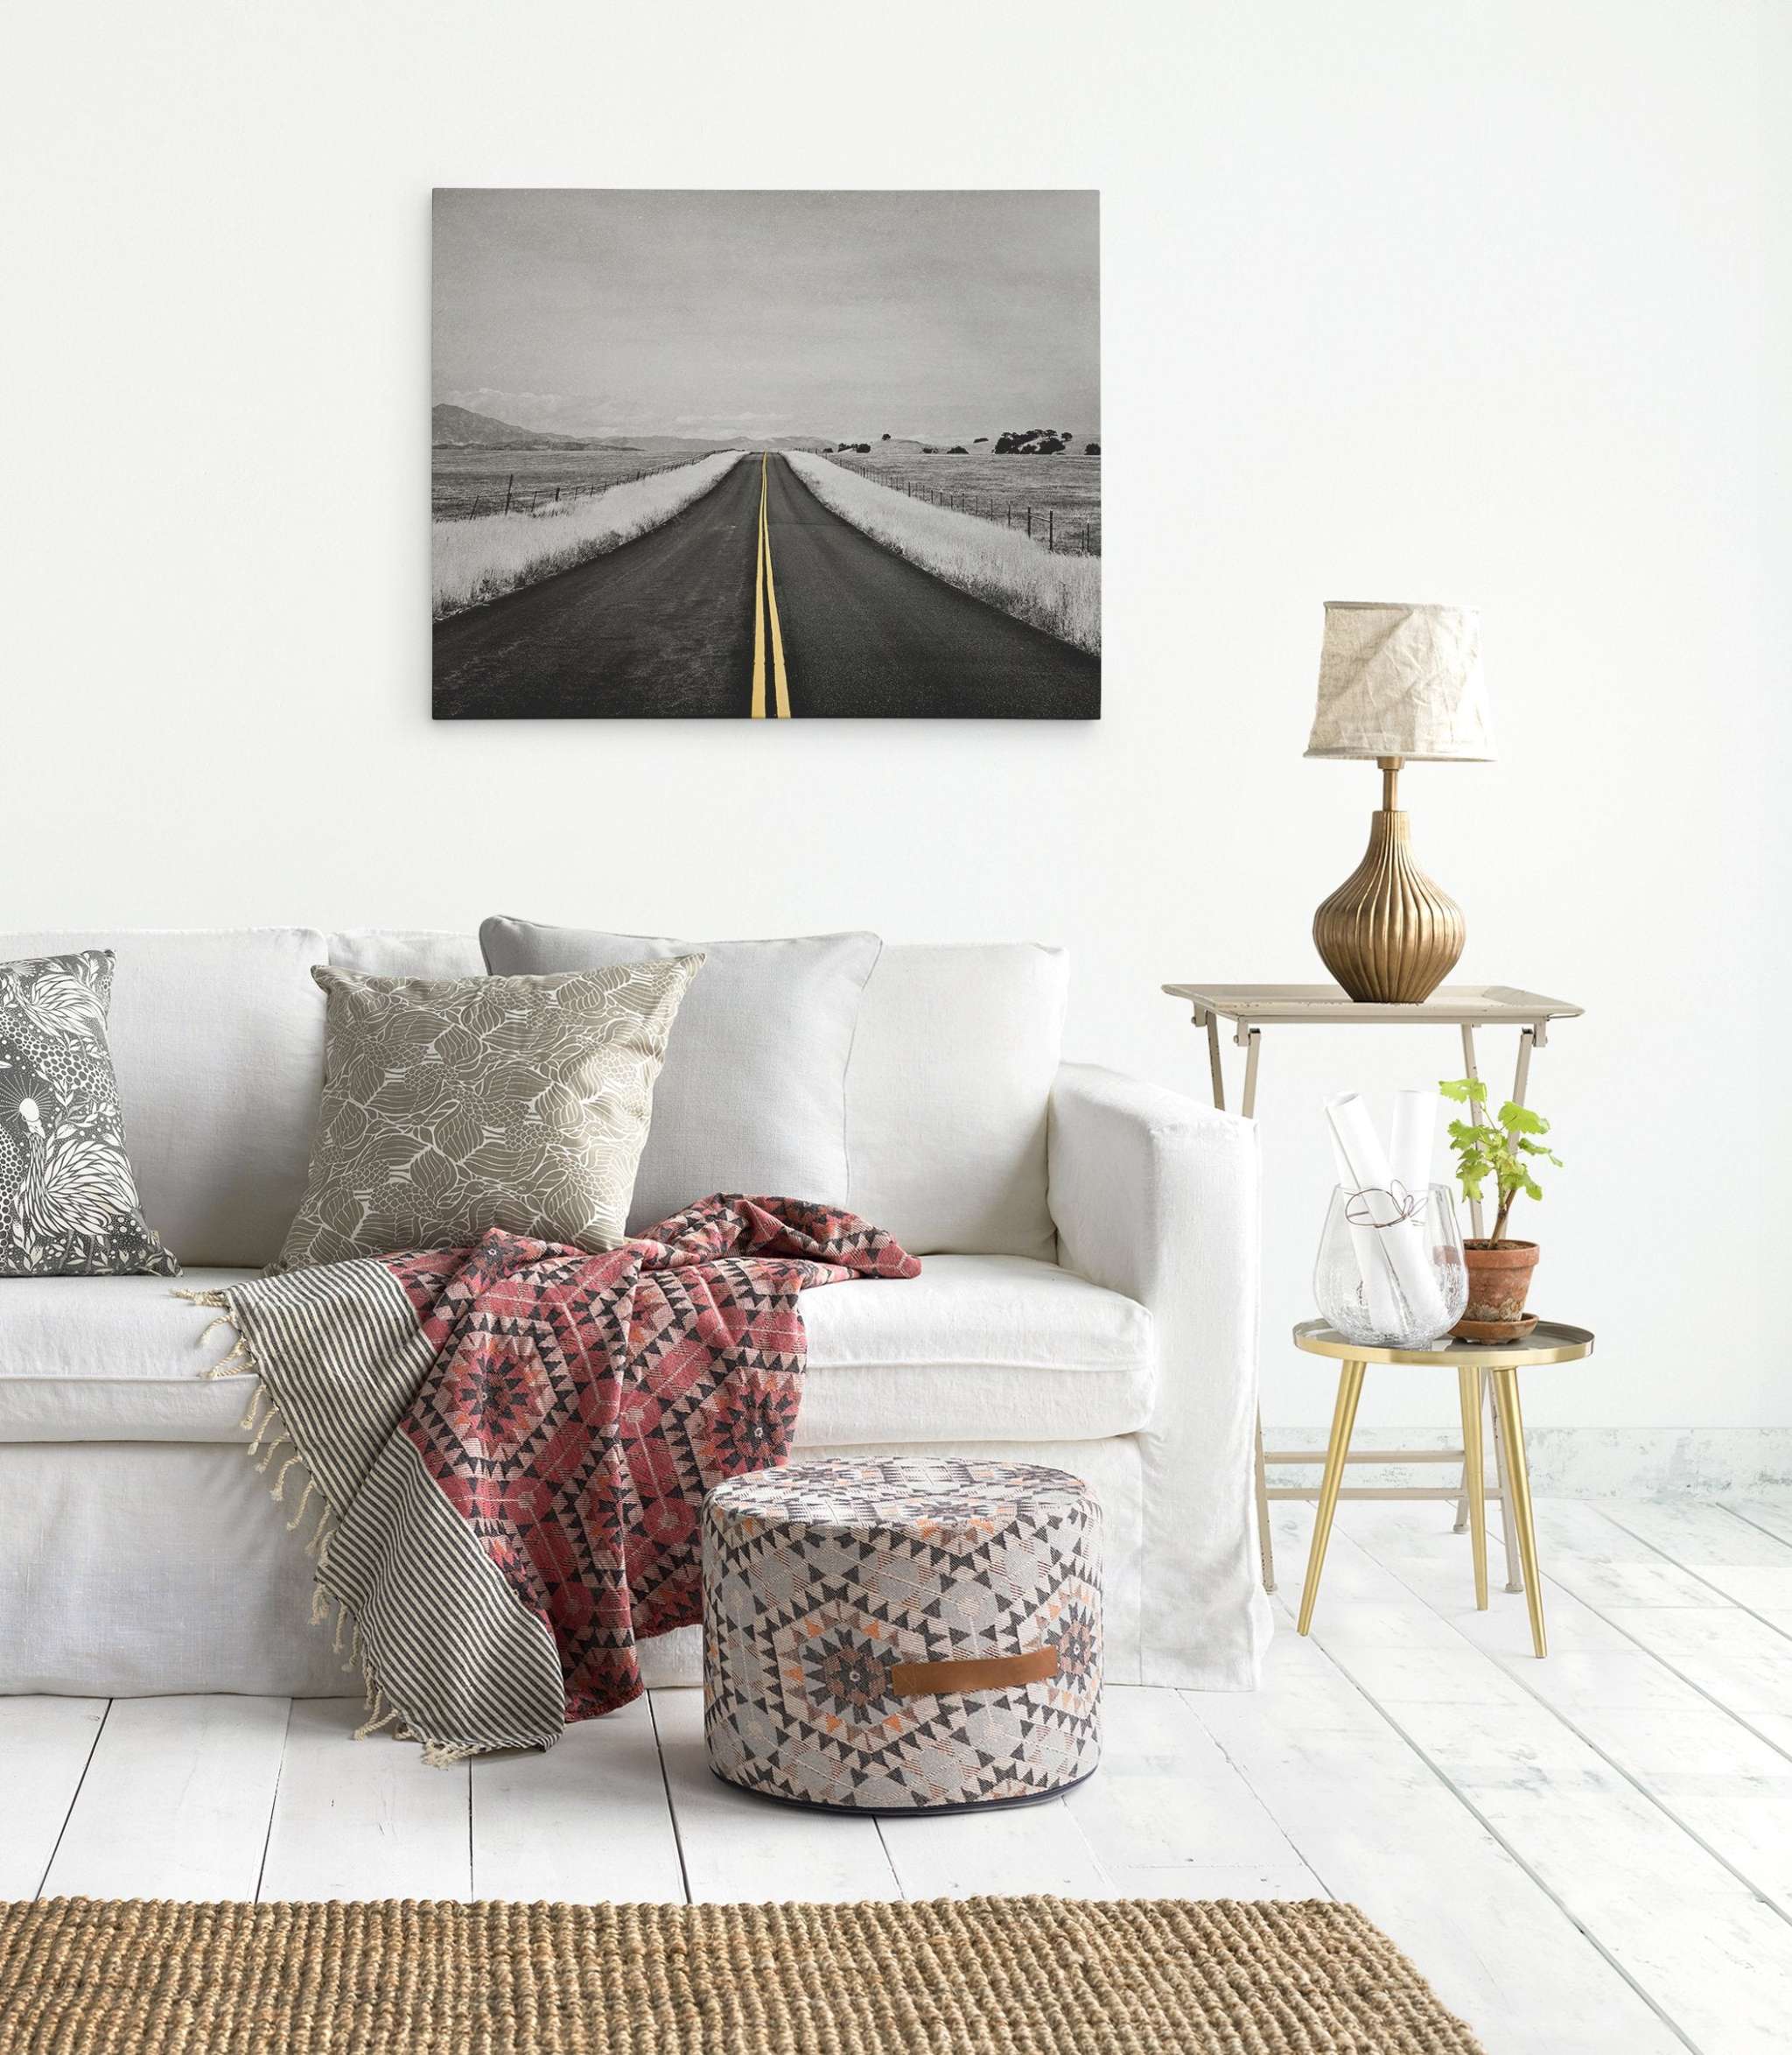 A minimalist living room with a white sofa adorned with patterned cushions and a red geometric throw, a pouf with a similar design, a small side table with a lamp and plants, and large Offley Green canvas prints of Black and White Road Photography with Color Accent, 'Yellow Road Trip' on the white wall.